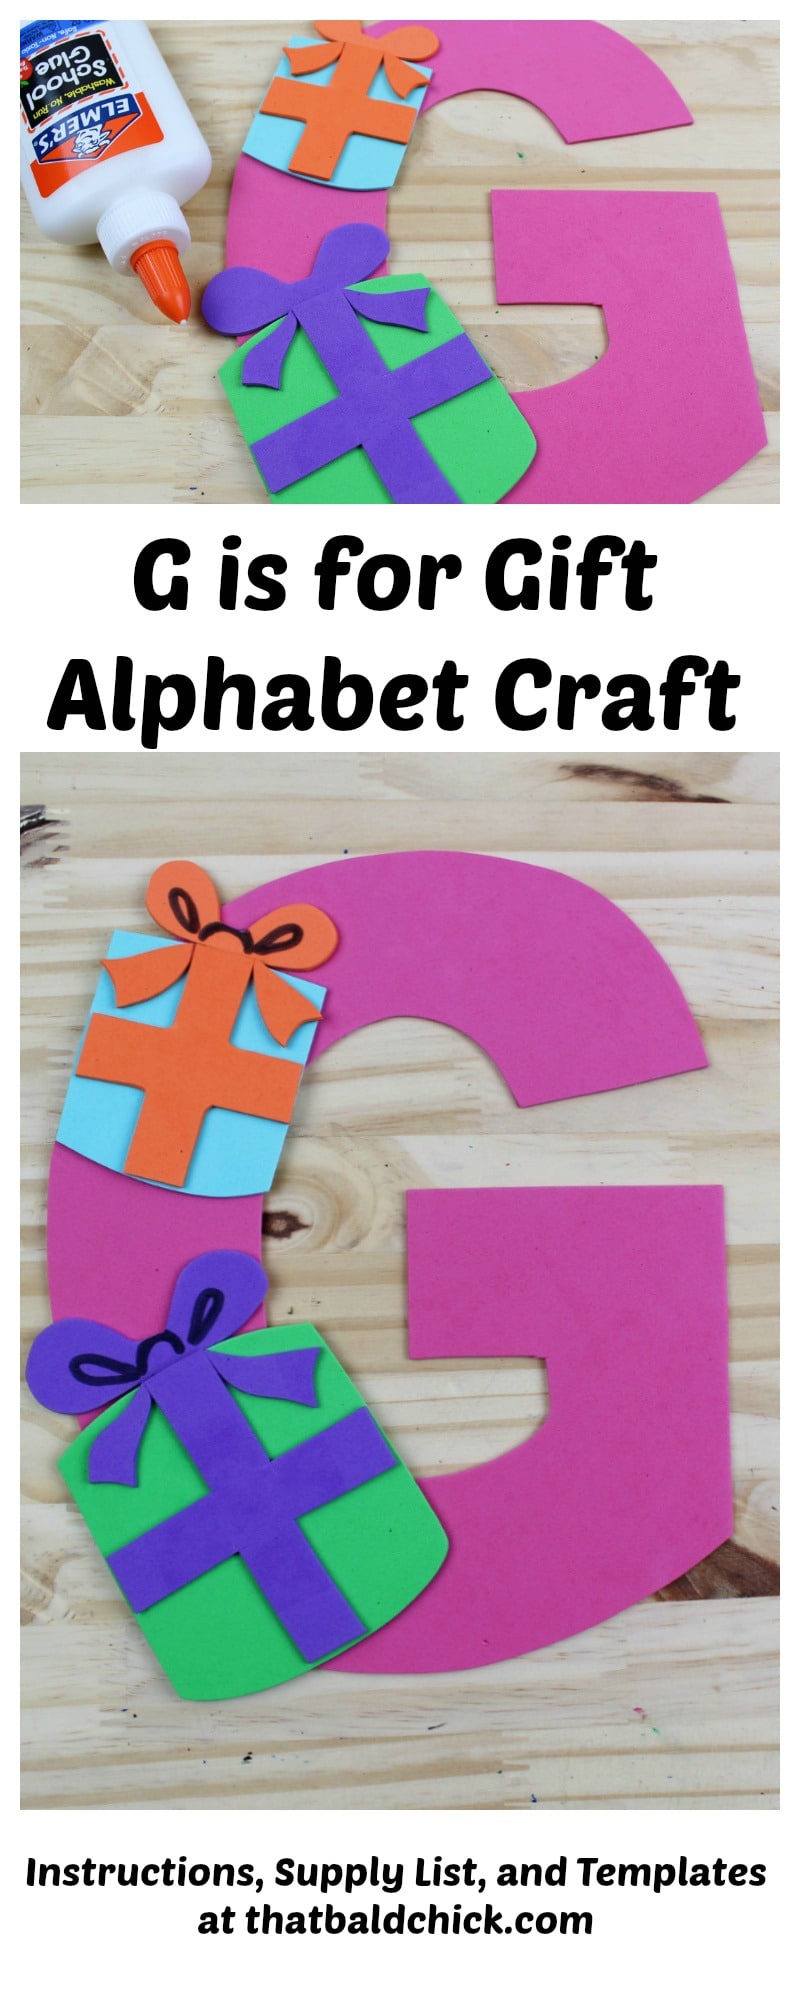 G is for Gift Alphabet Craft - supply list, instructions, and templates at thatbaldchick.com